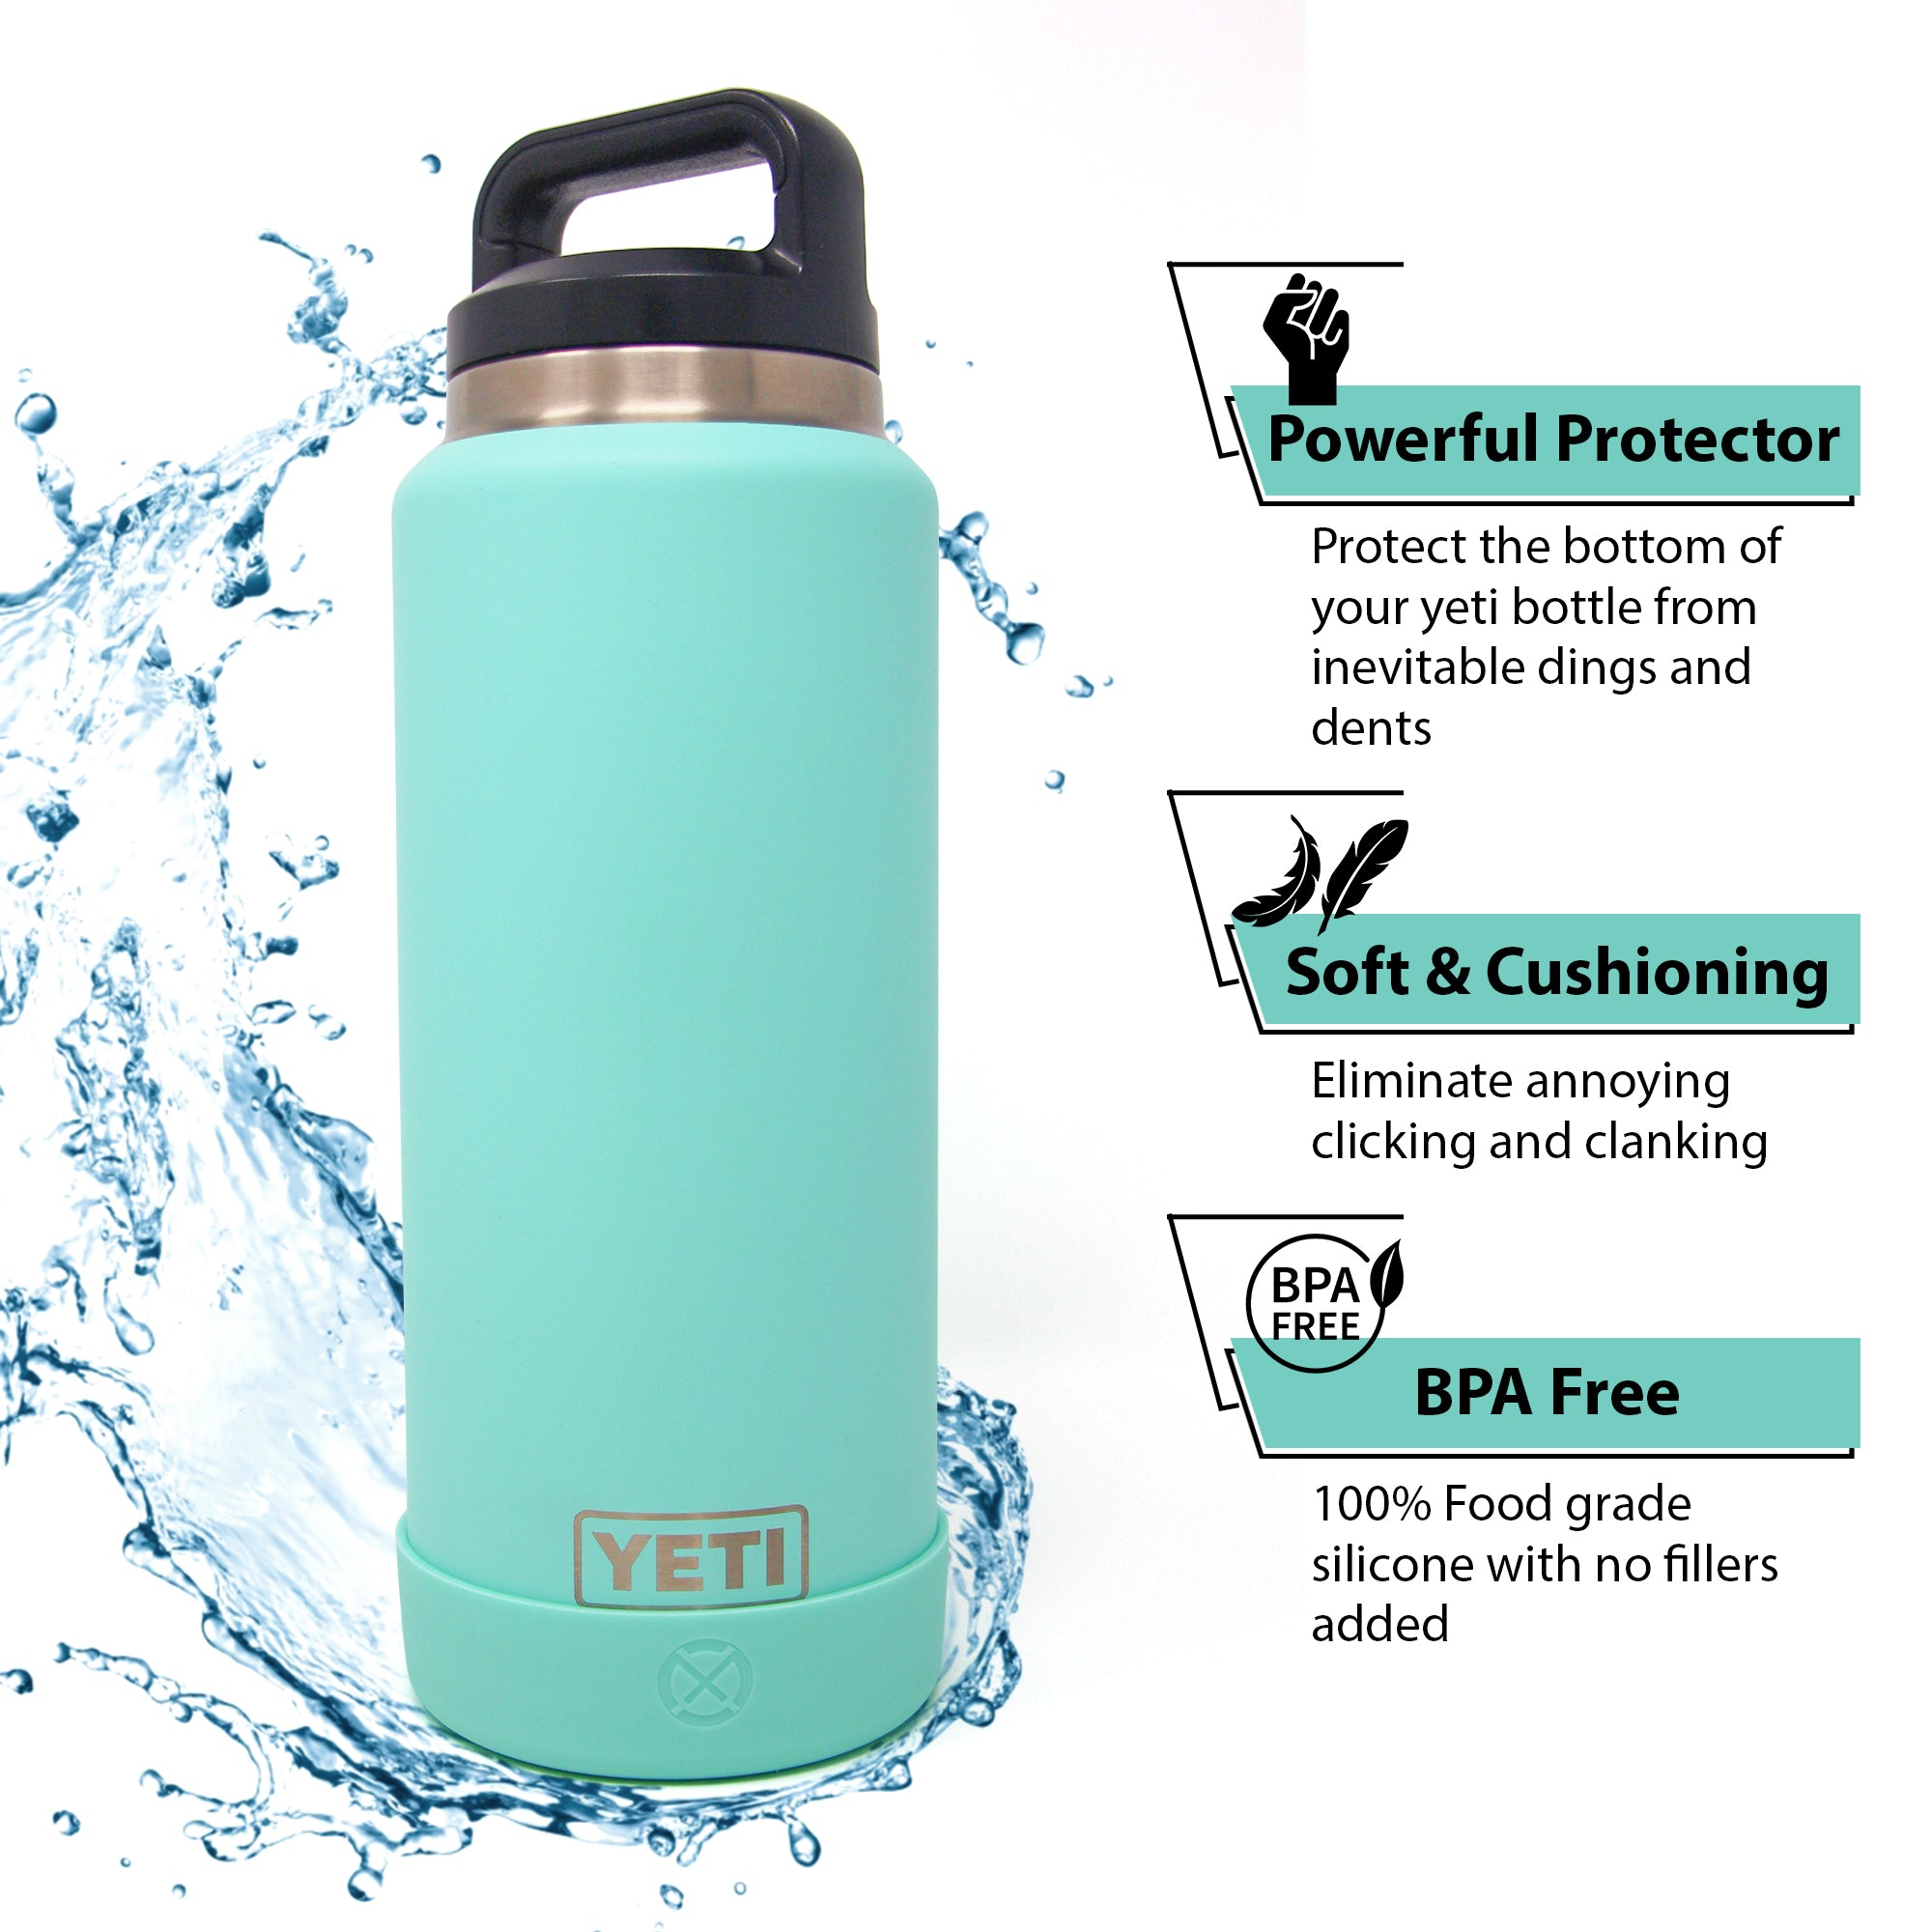 Planetbox Silicone Water Bottle Boot - Teal